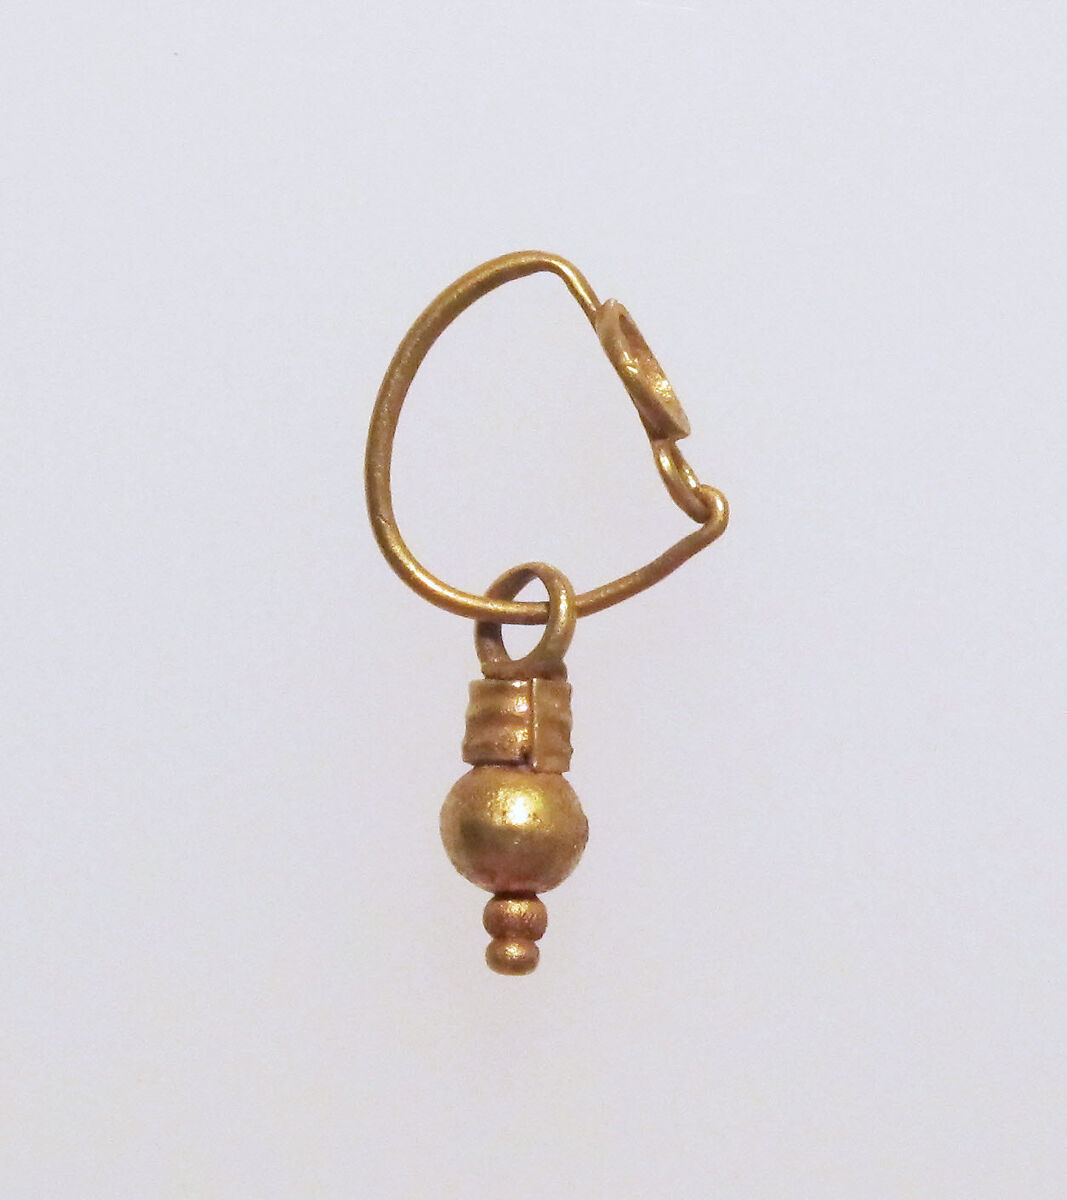 Gold earring with disc and pendant, Gold, Roman 